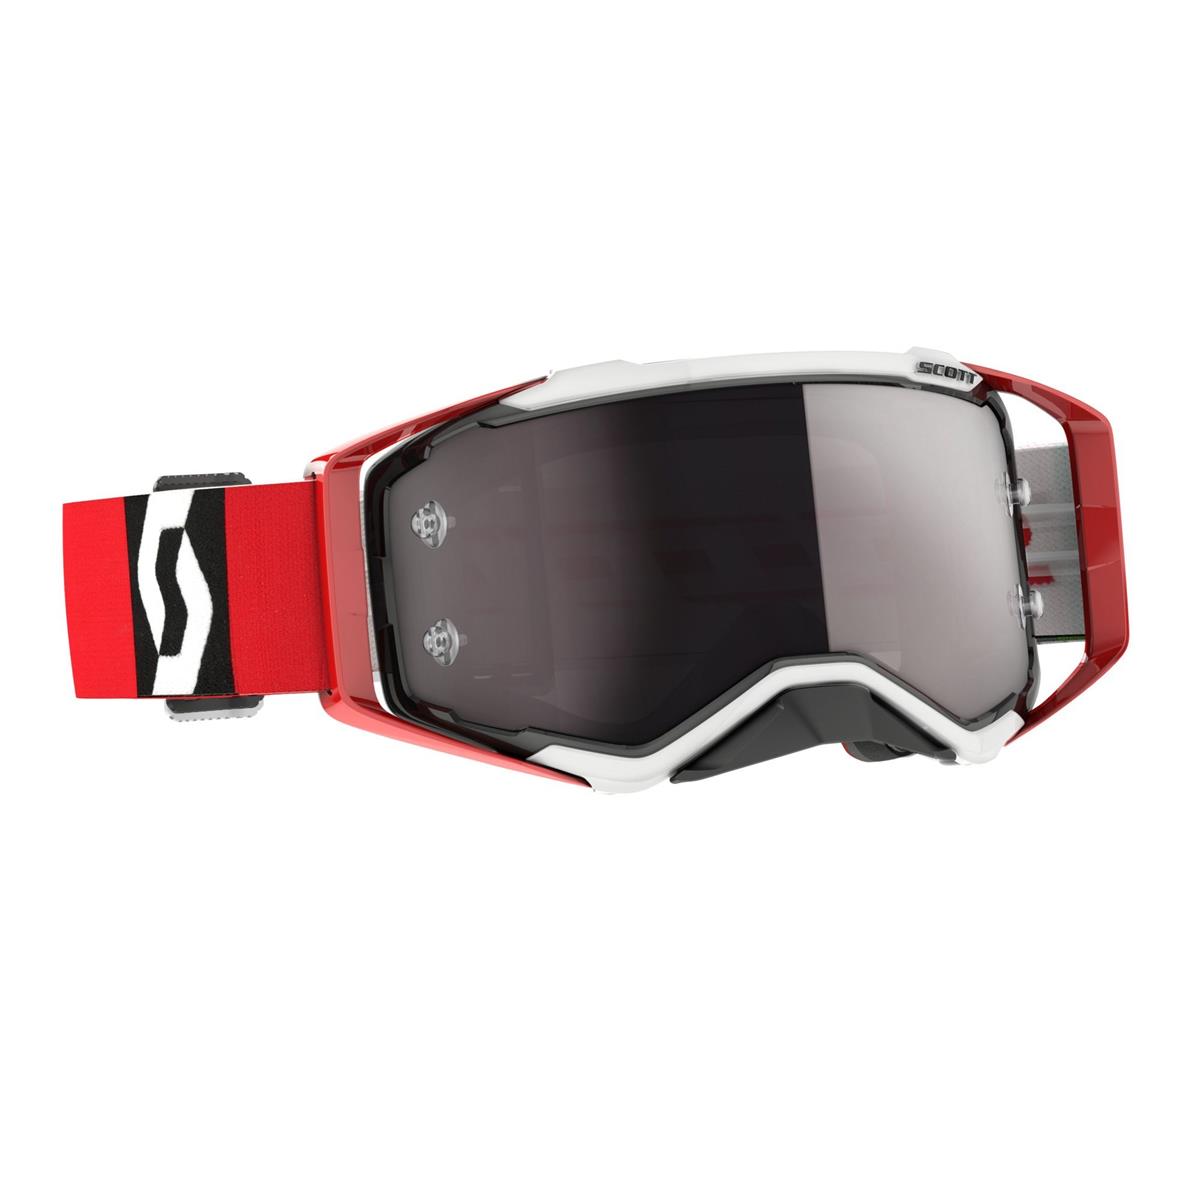 Prospect Mask Black/Red With Chrome Works Silver Lens